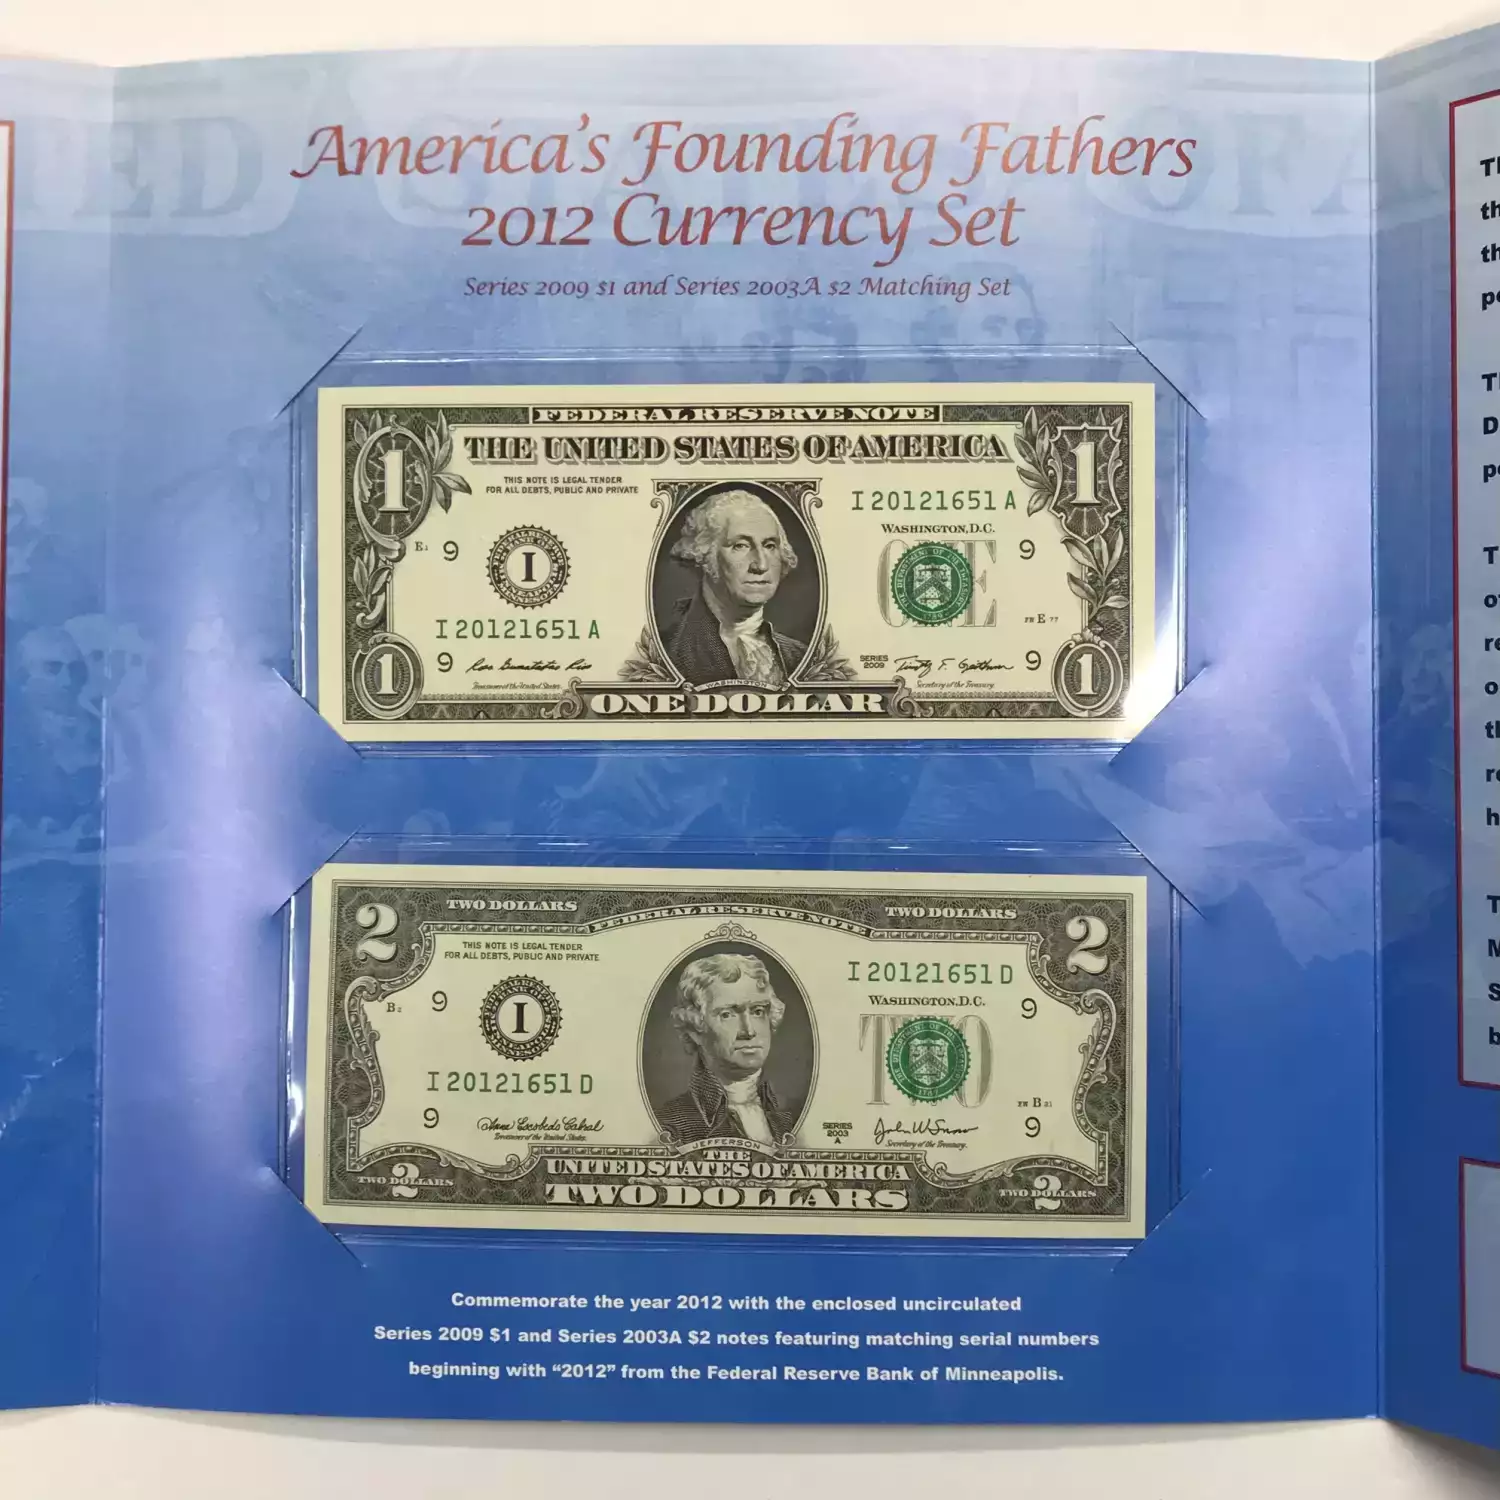 2012 BEP 150th Anniversary Currency Set - Series 2009 $2 & $5 FRN Notes [DUPLICATE for #547302] (2)